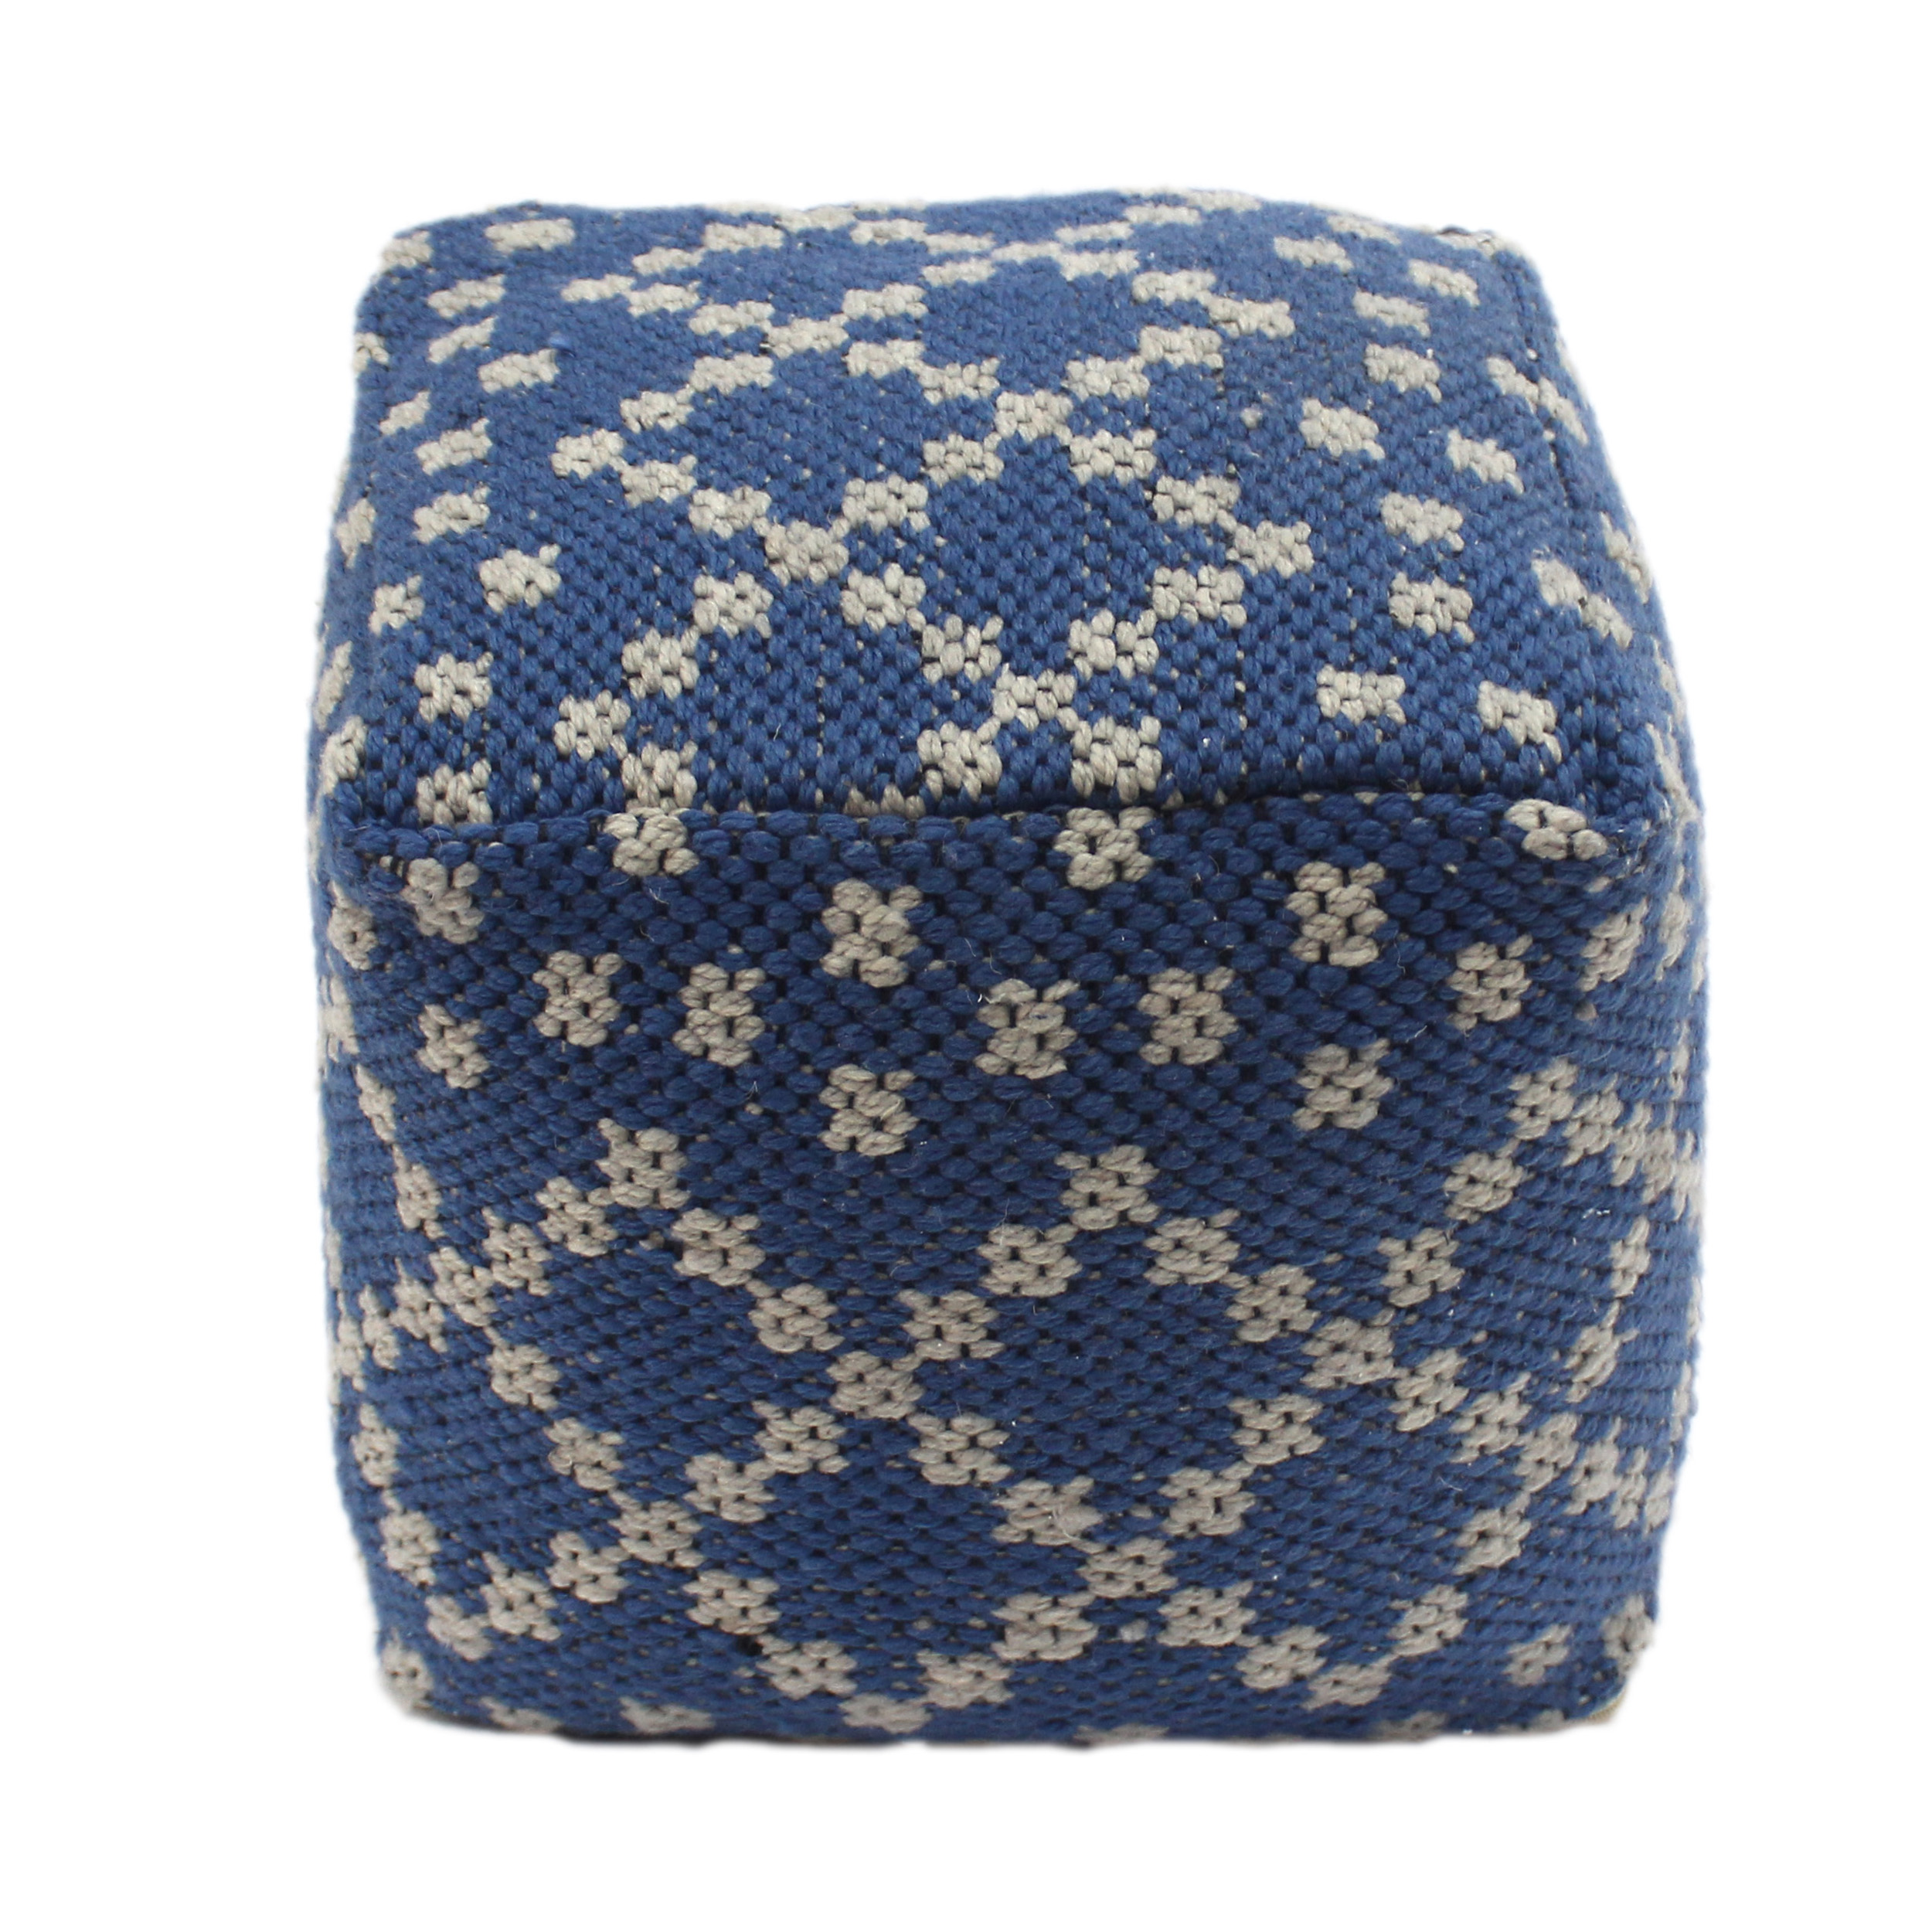 Ophelia Outdoor Handcrafted Boho Fabric Cube Pouf, Blue and White - image 5 of 6